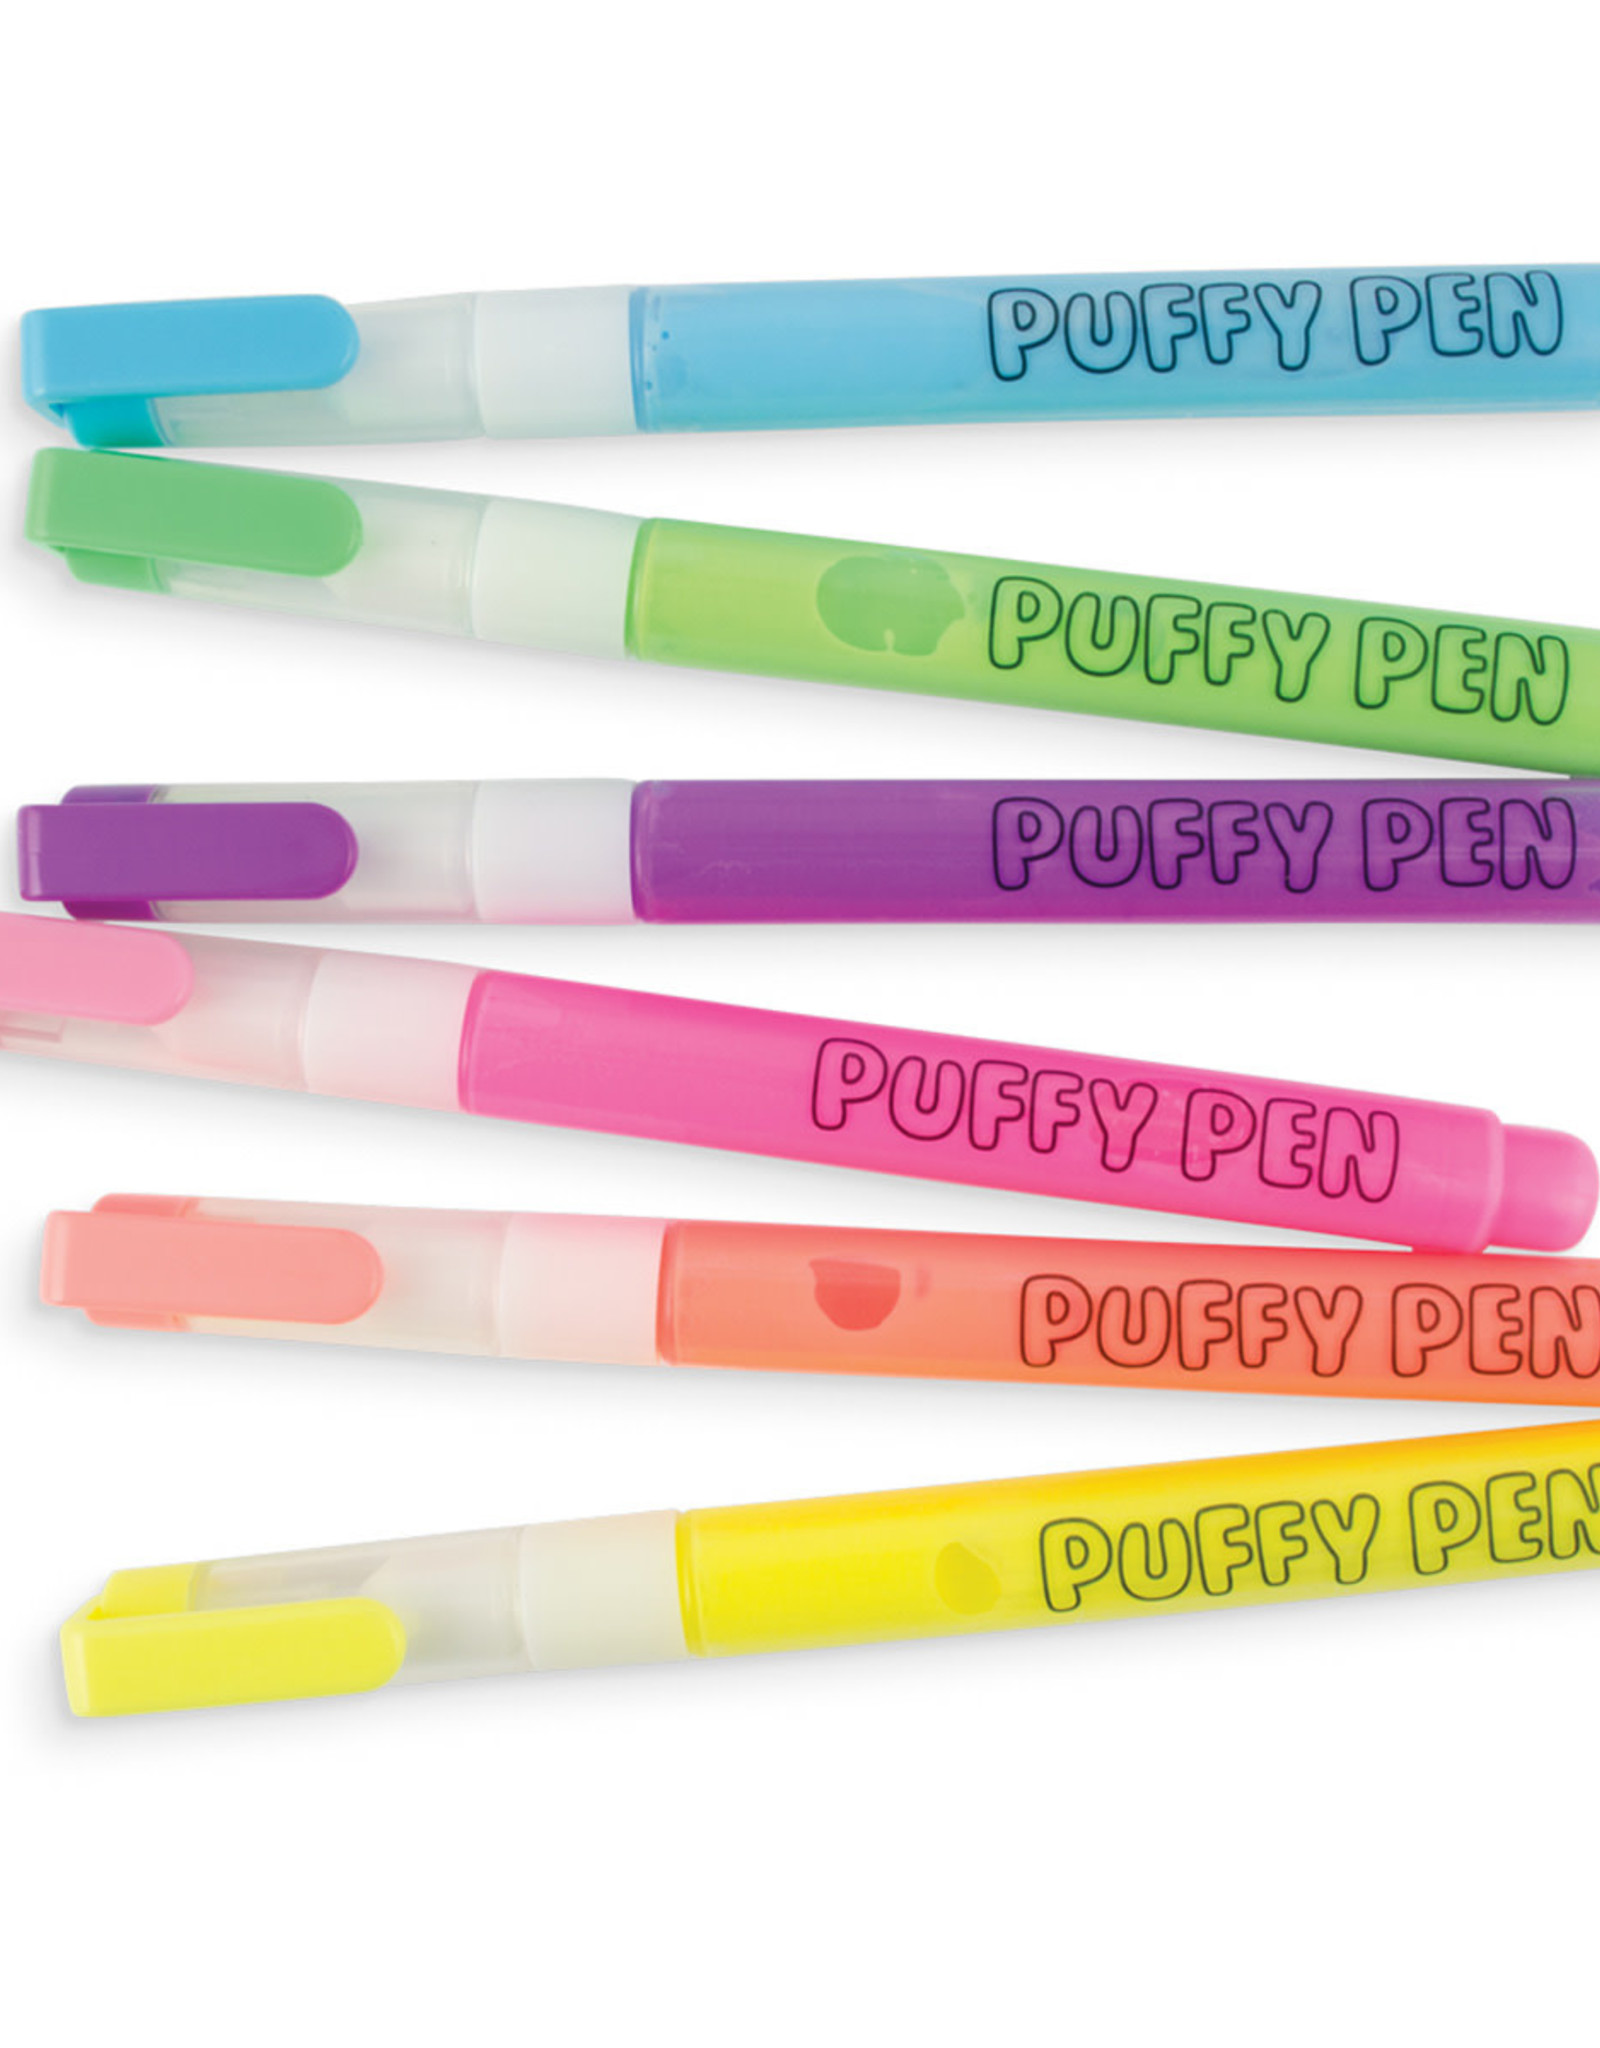 Ooly Magic Neon Puffy Pens